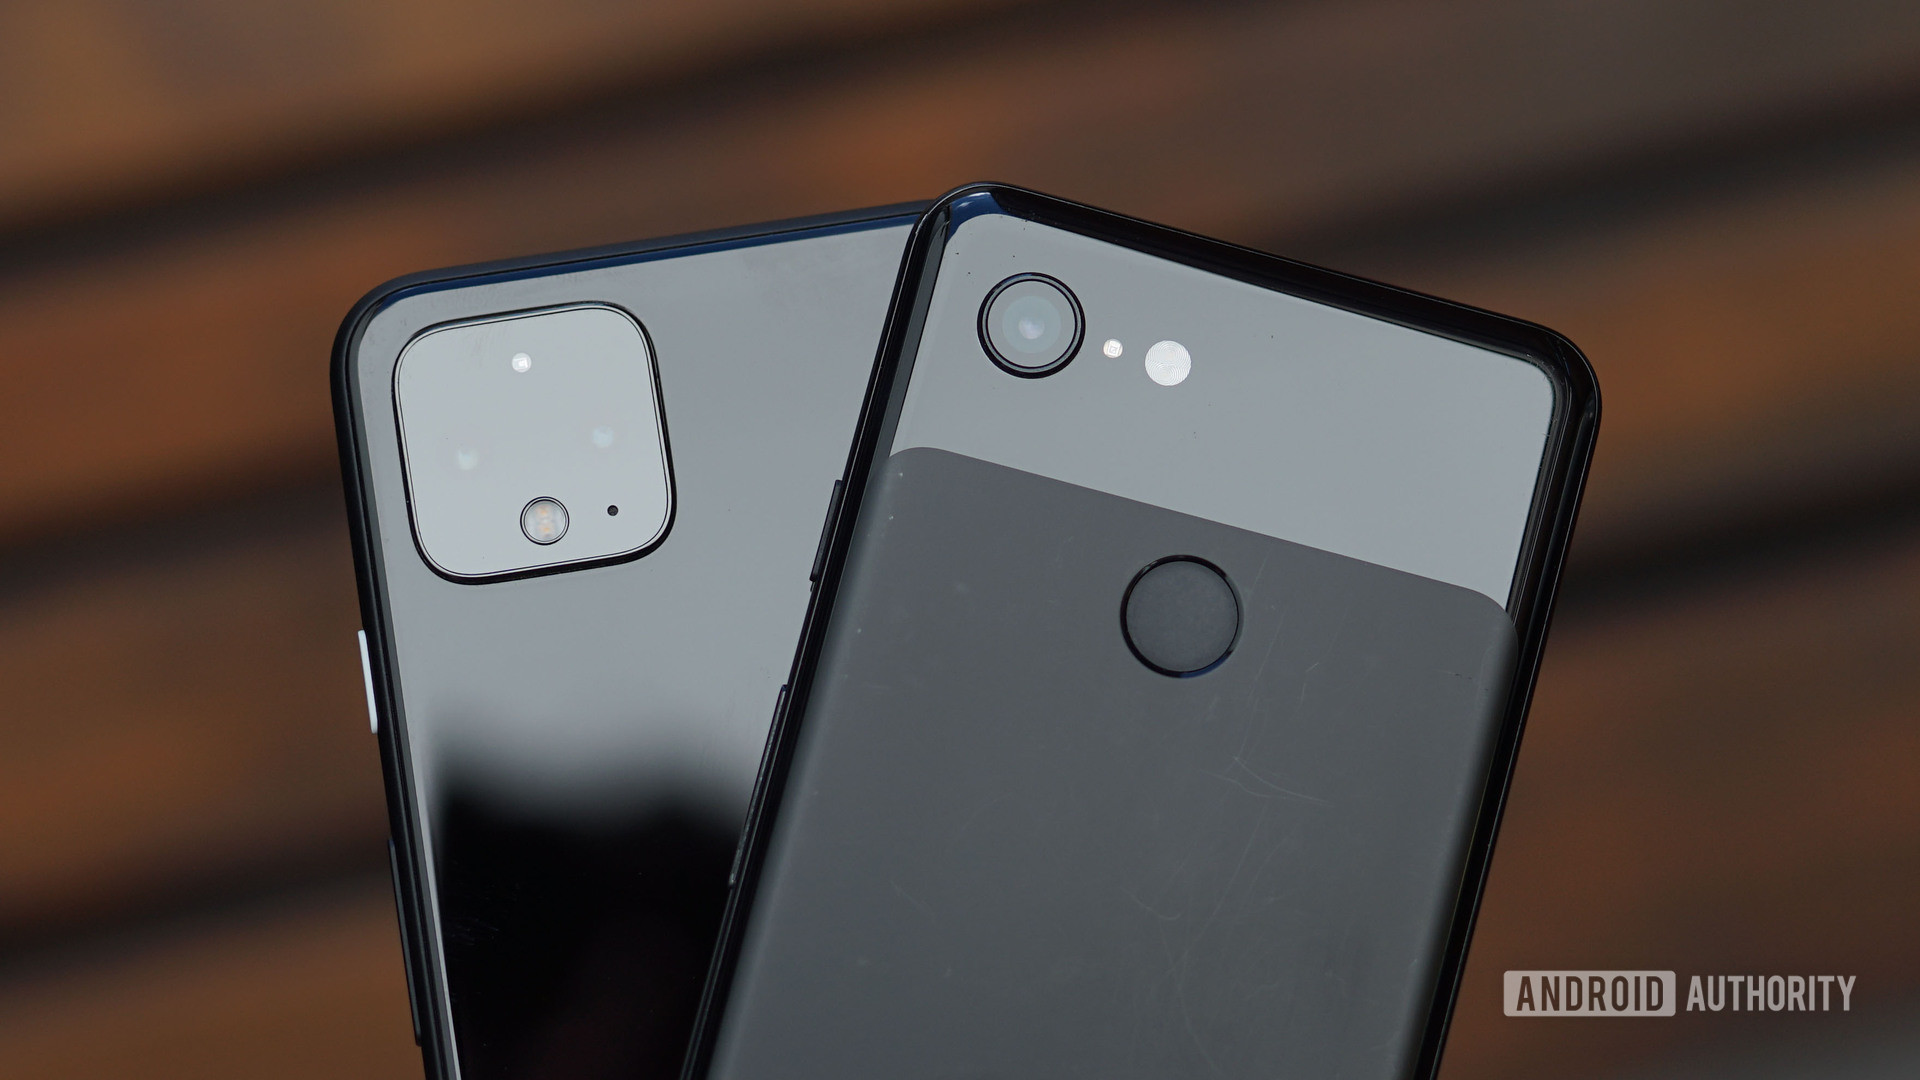 Google Pixel 3 vs Pixel 4 featuring the new neural core